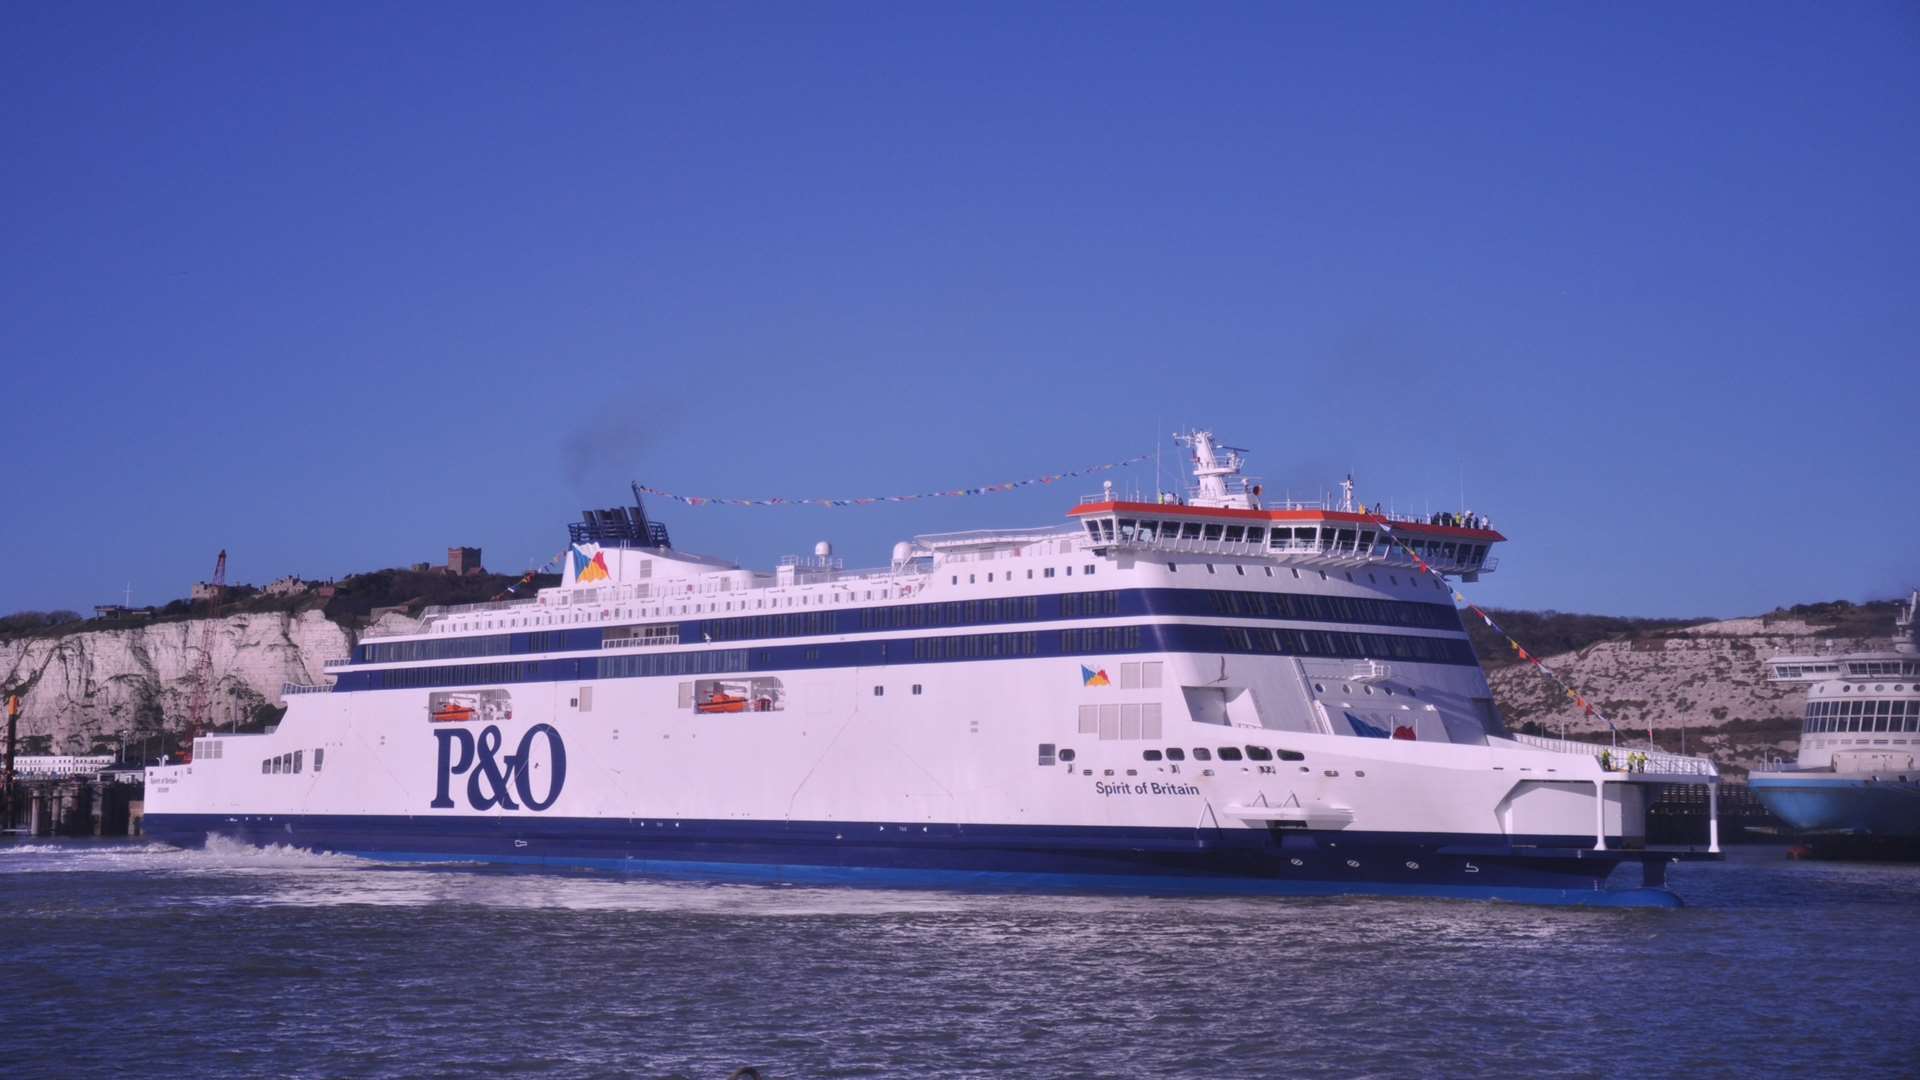 P&O Ferries operates six ferries from Dover to Calais